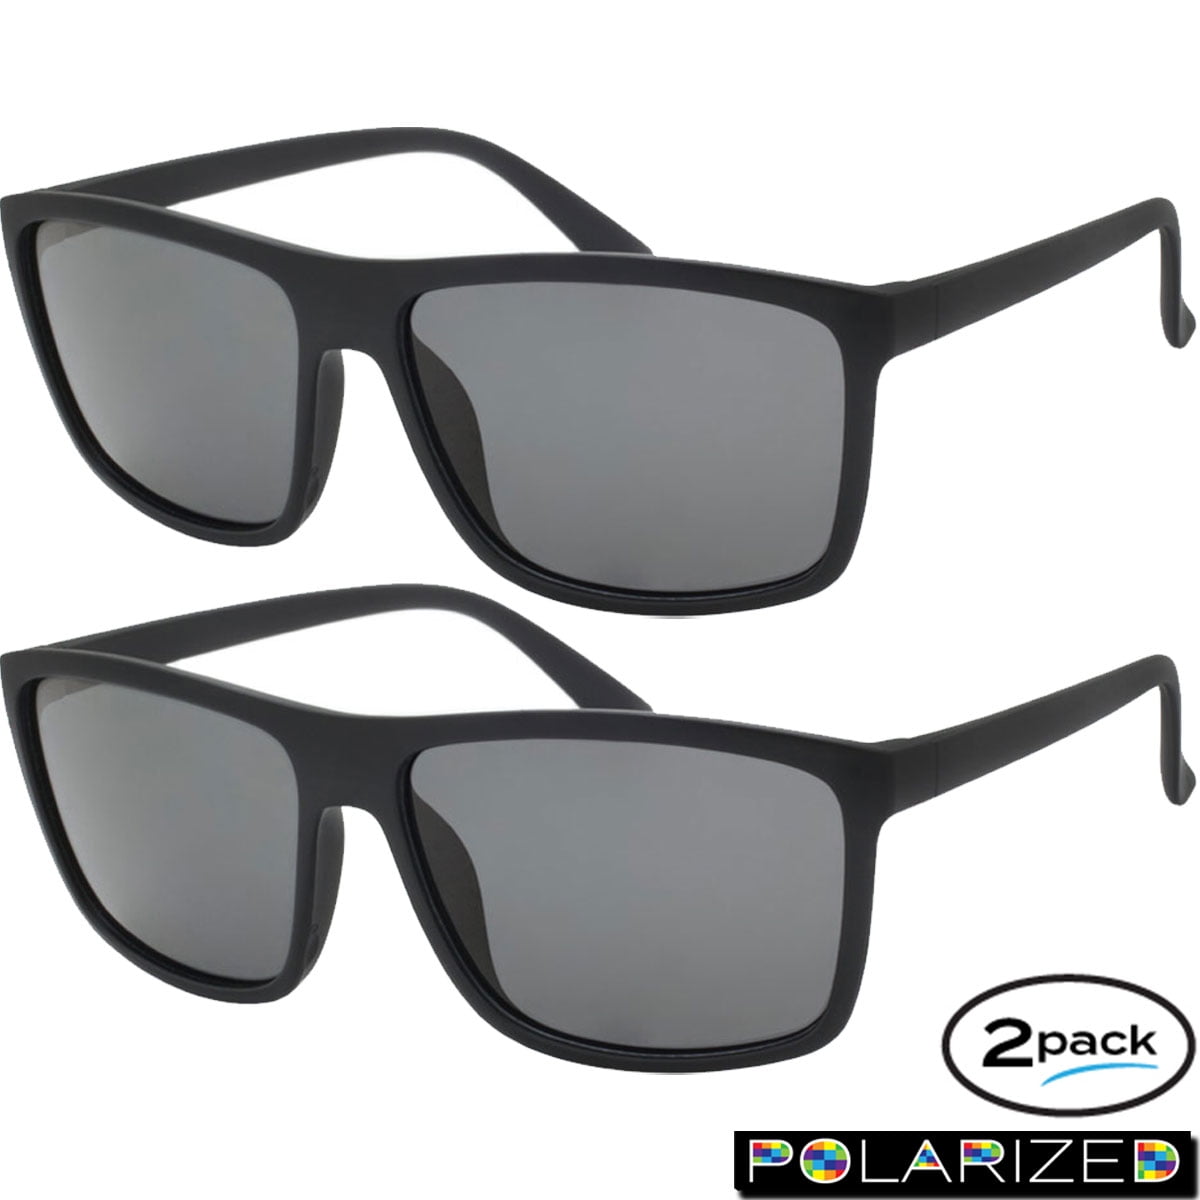 Polarized Sunglasses 2 Pack for Men and Women All Black Style Classic Frame  Sunglass 